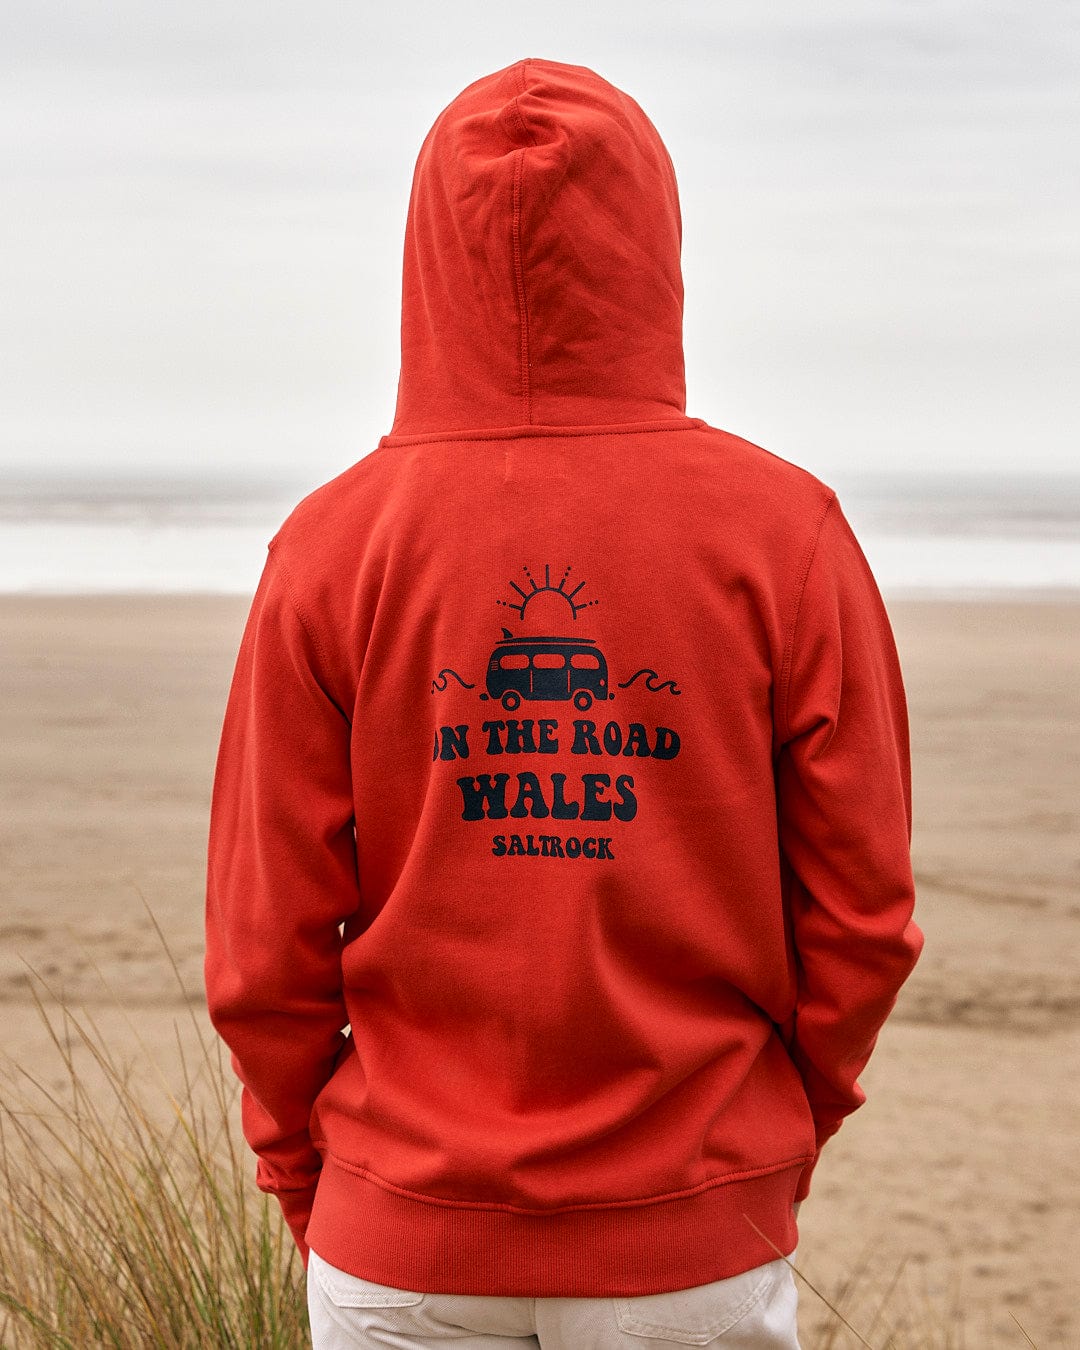 The back of a woman wearing a Saltrock On The Road Wales - Women's Zip Hoodie - Red.